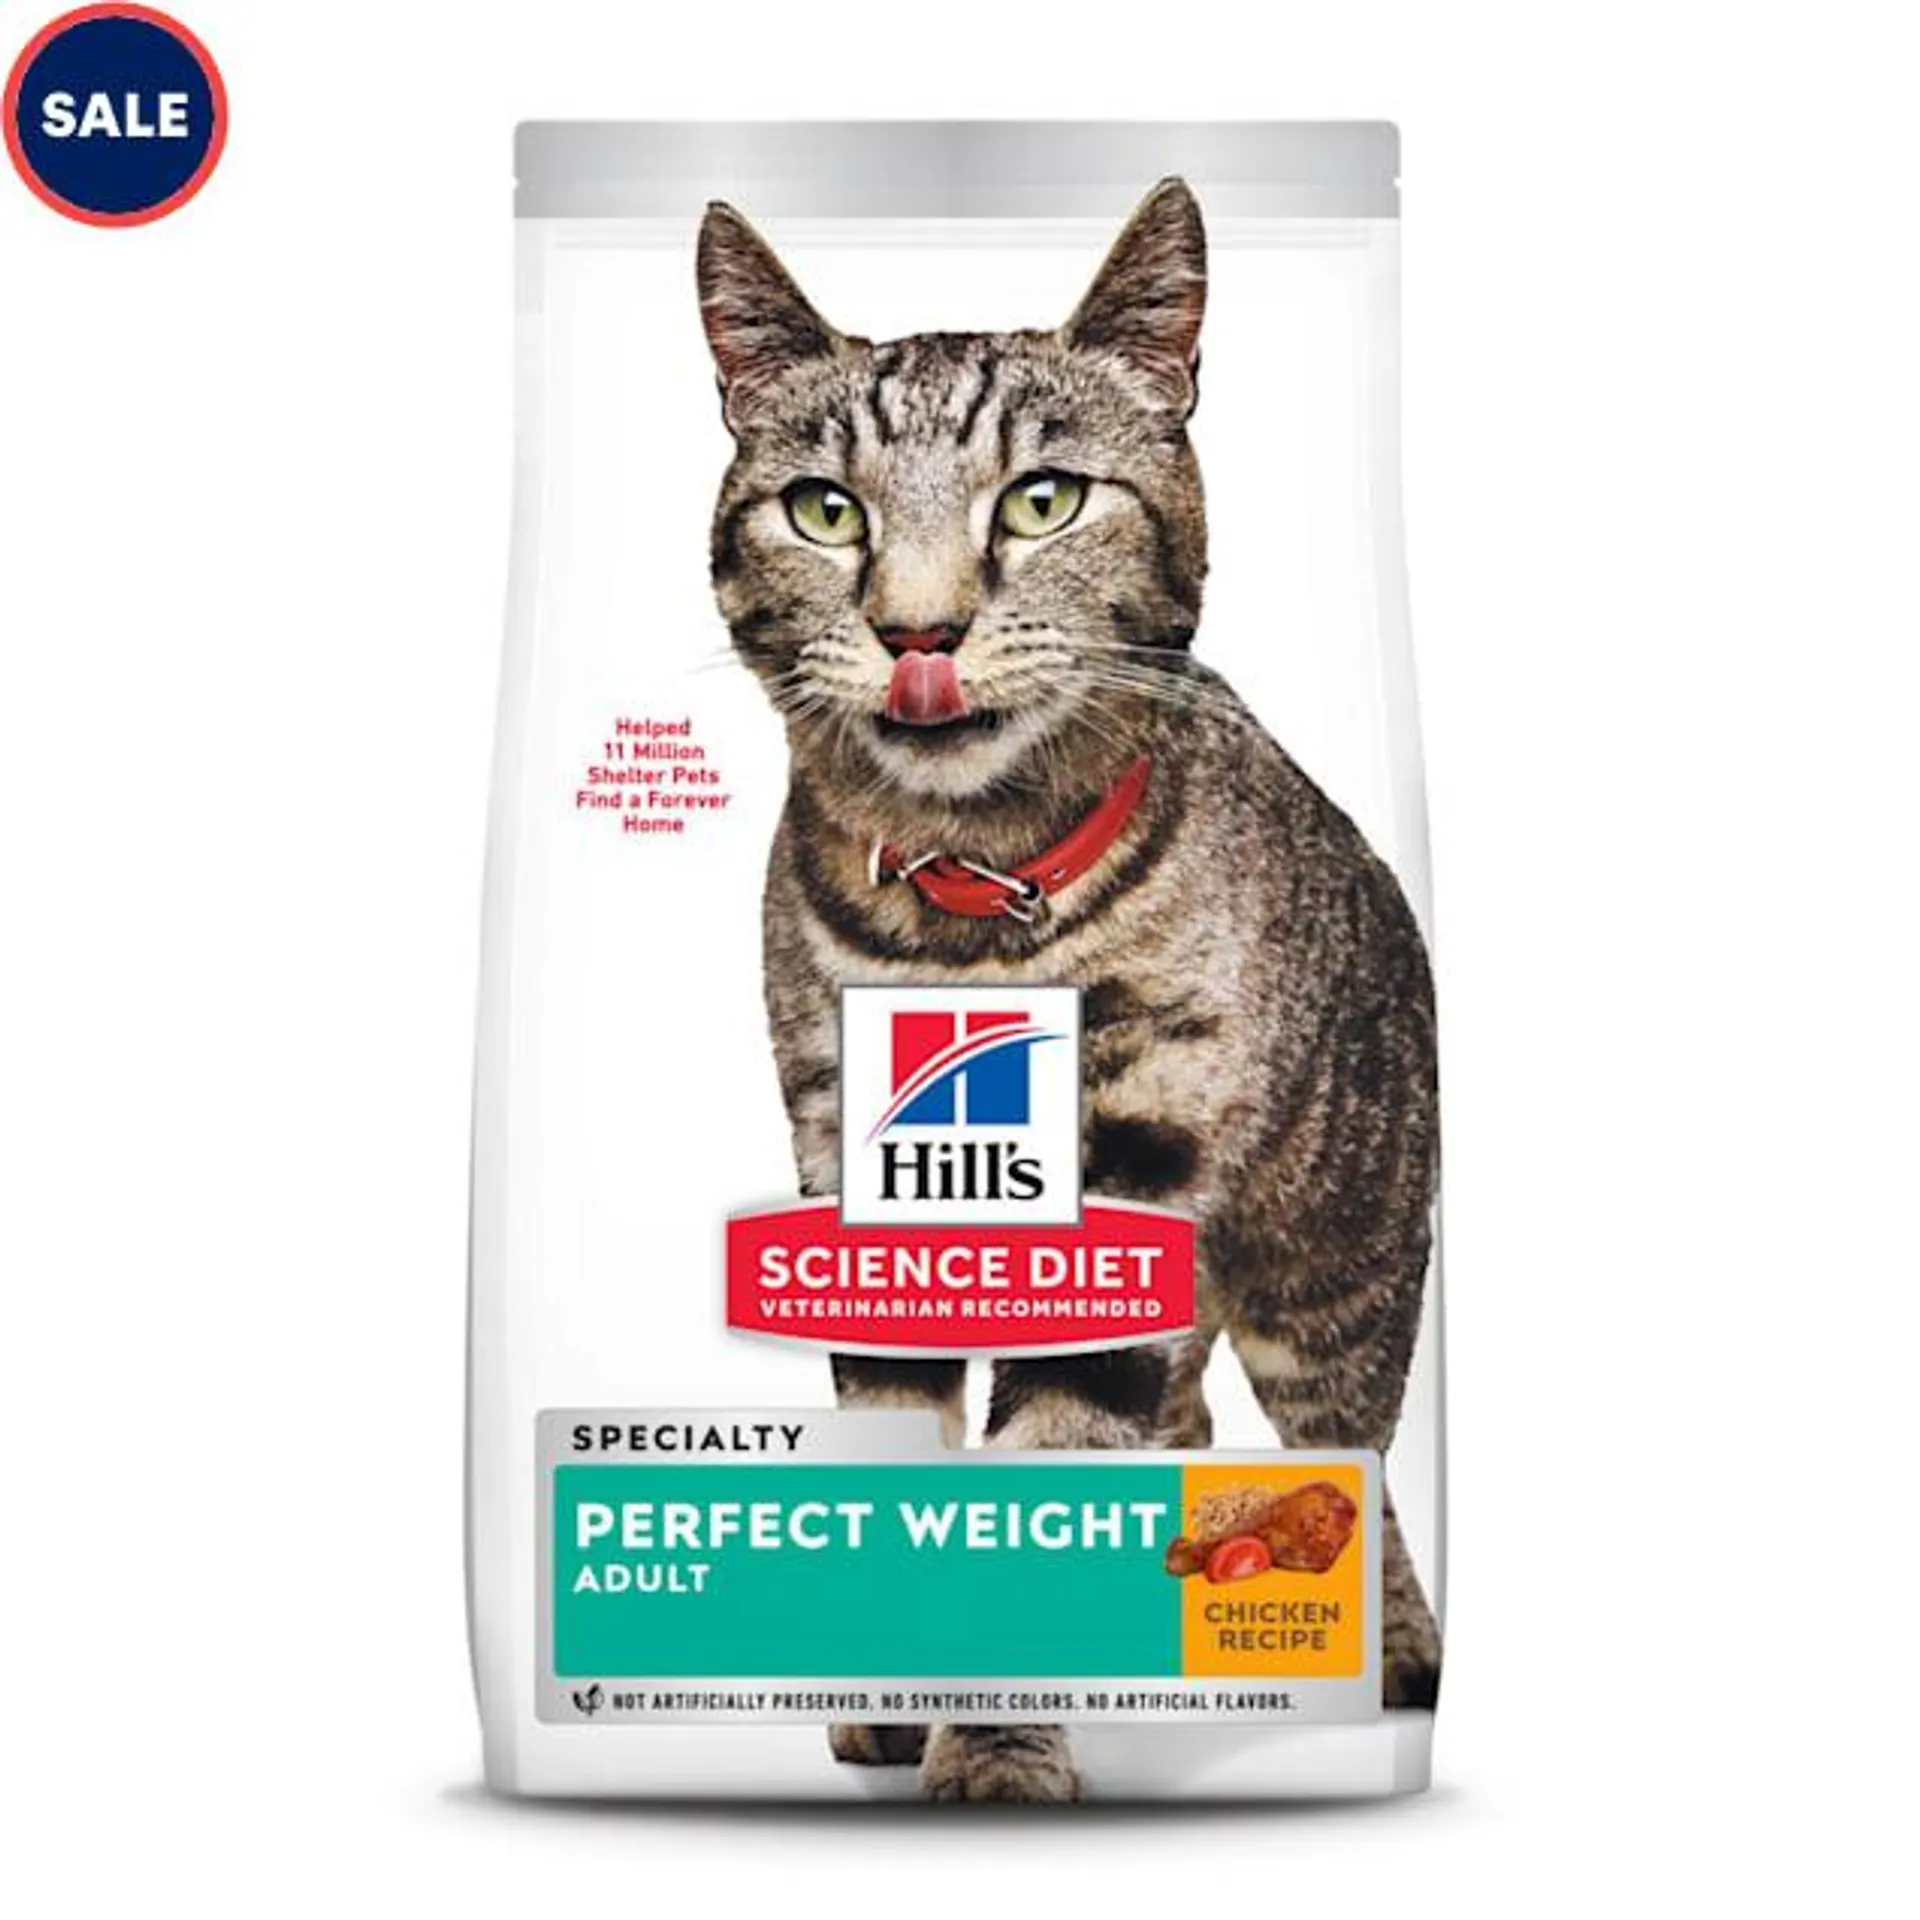 Hill's Science Diet Adult Perfect Weight Chicken Recipe Dry Cat Food, 15 lbs.